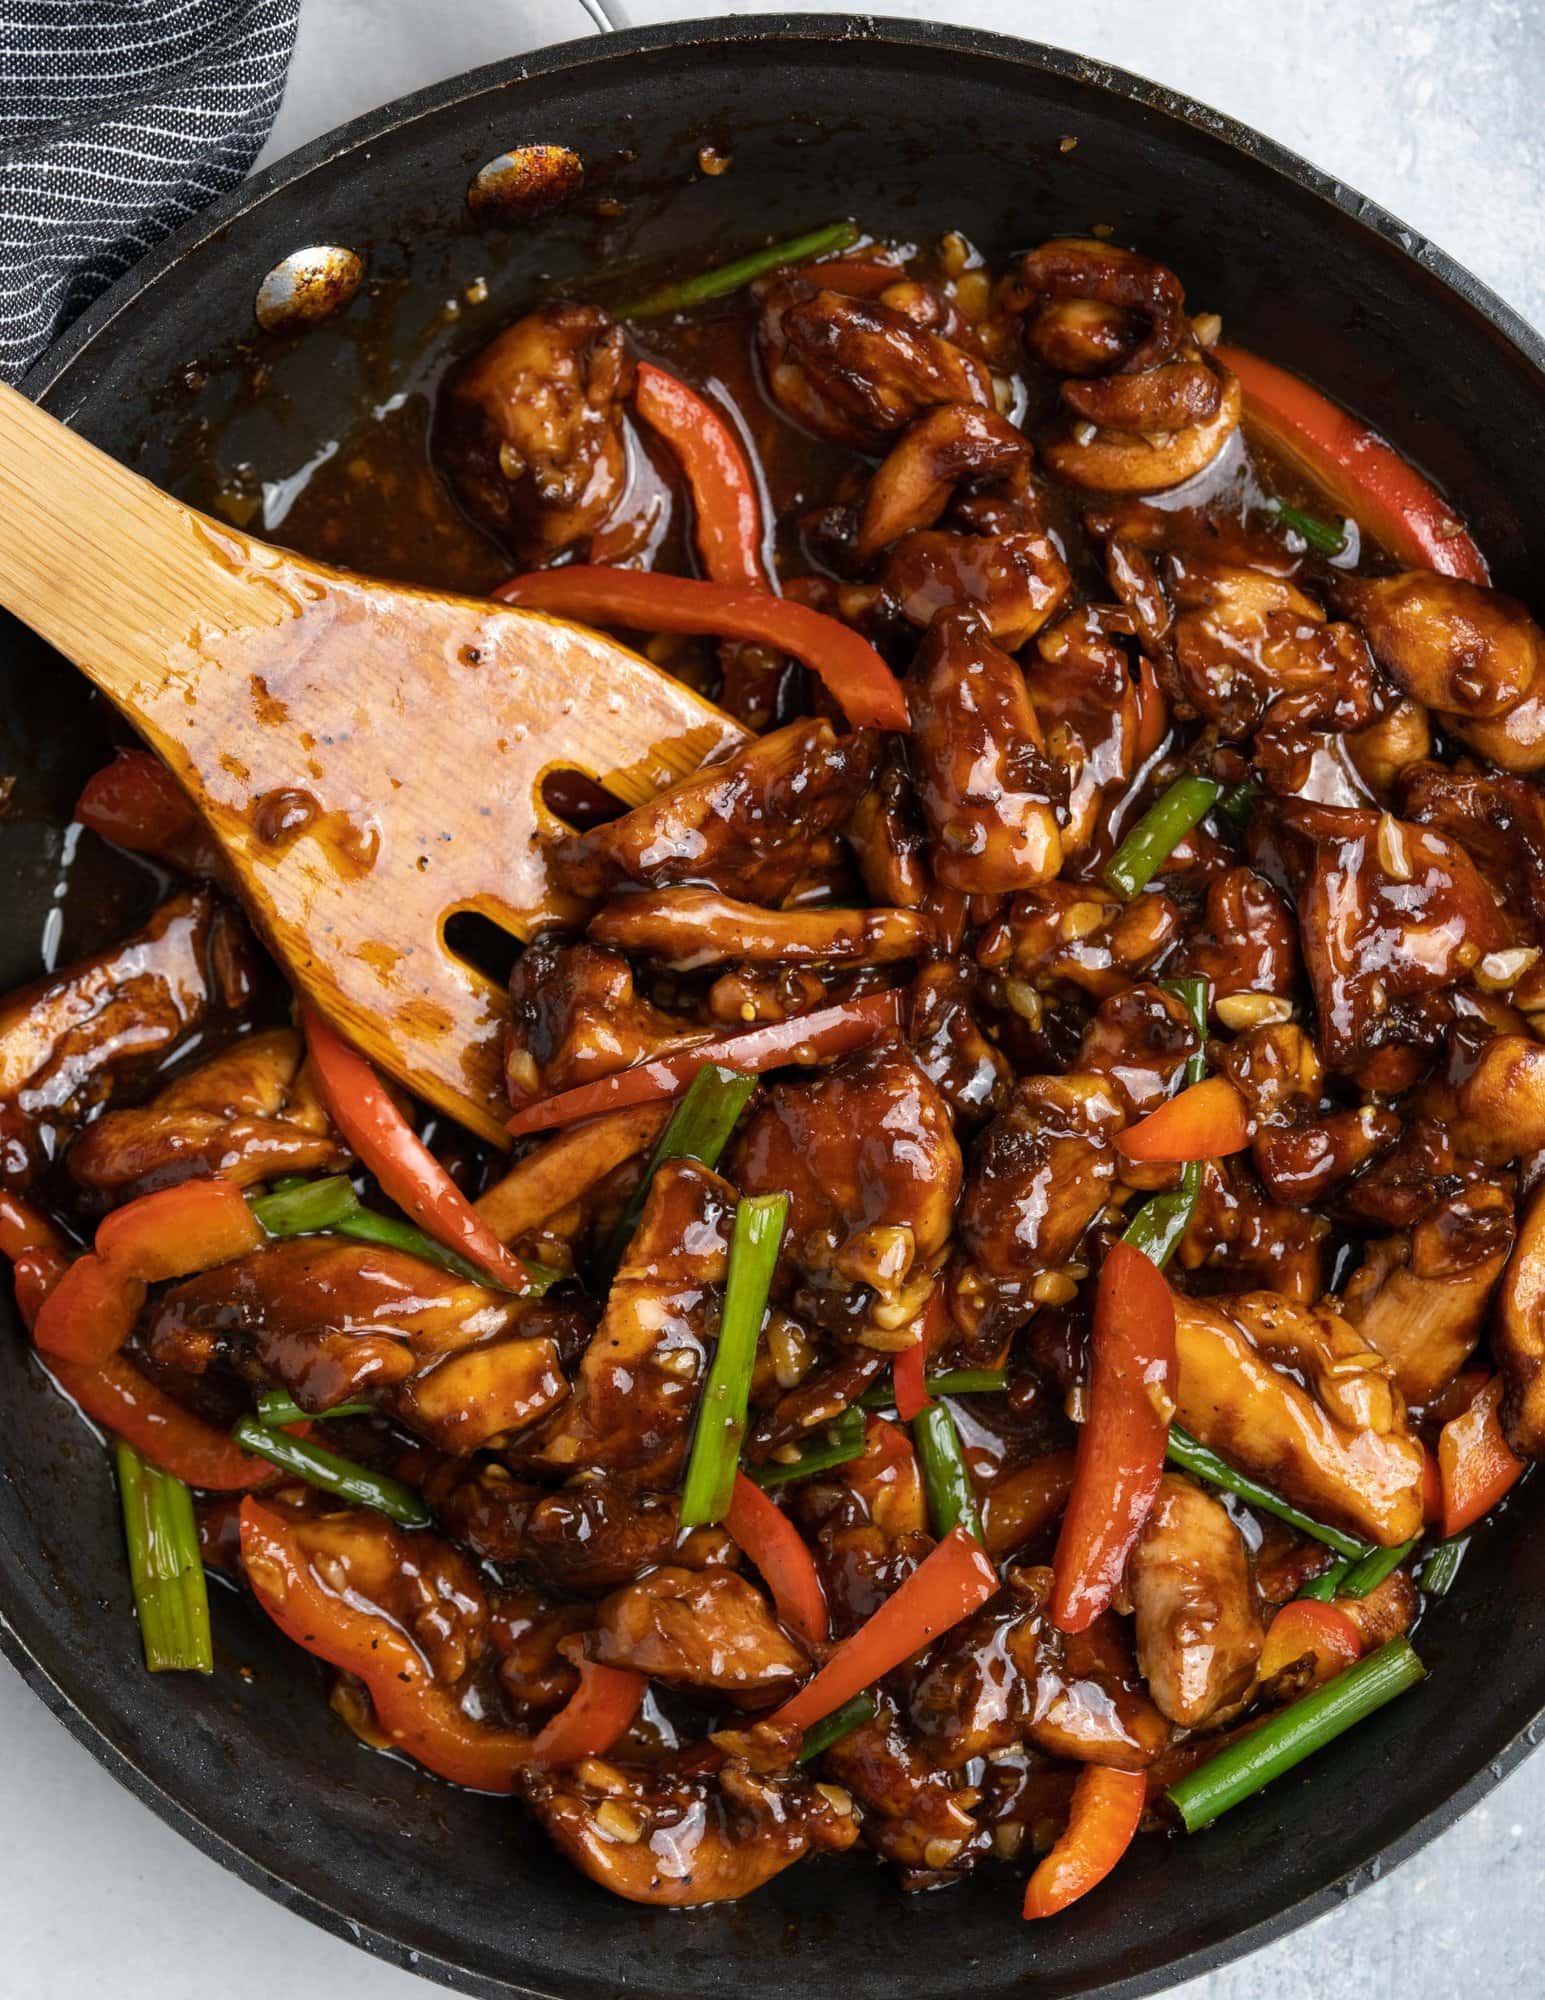 Chicken cooked in Chinese sauce with flavors from garlic in a black skillet and tossed with a wooden spatula